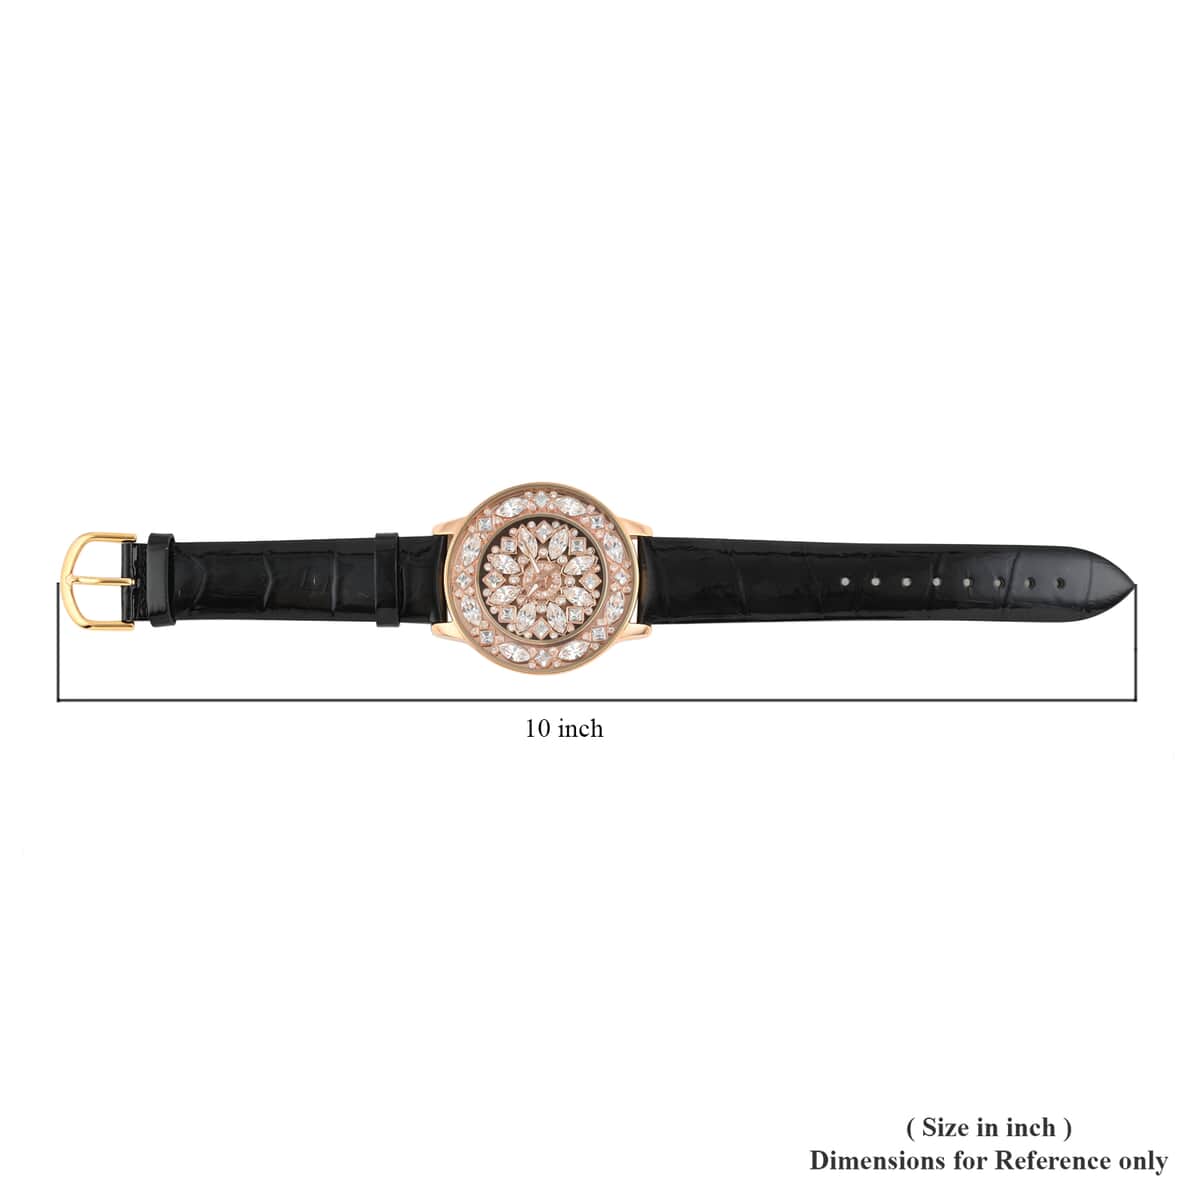 Adee Kaye Lafayette Austrian Crystal Japanese Movement Watch with Genuine Leather Strap in Black (45mm) image number 4